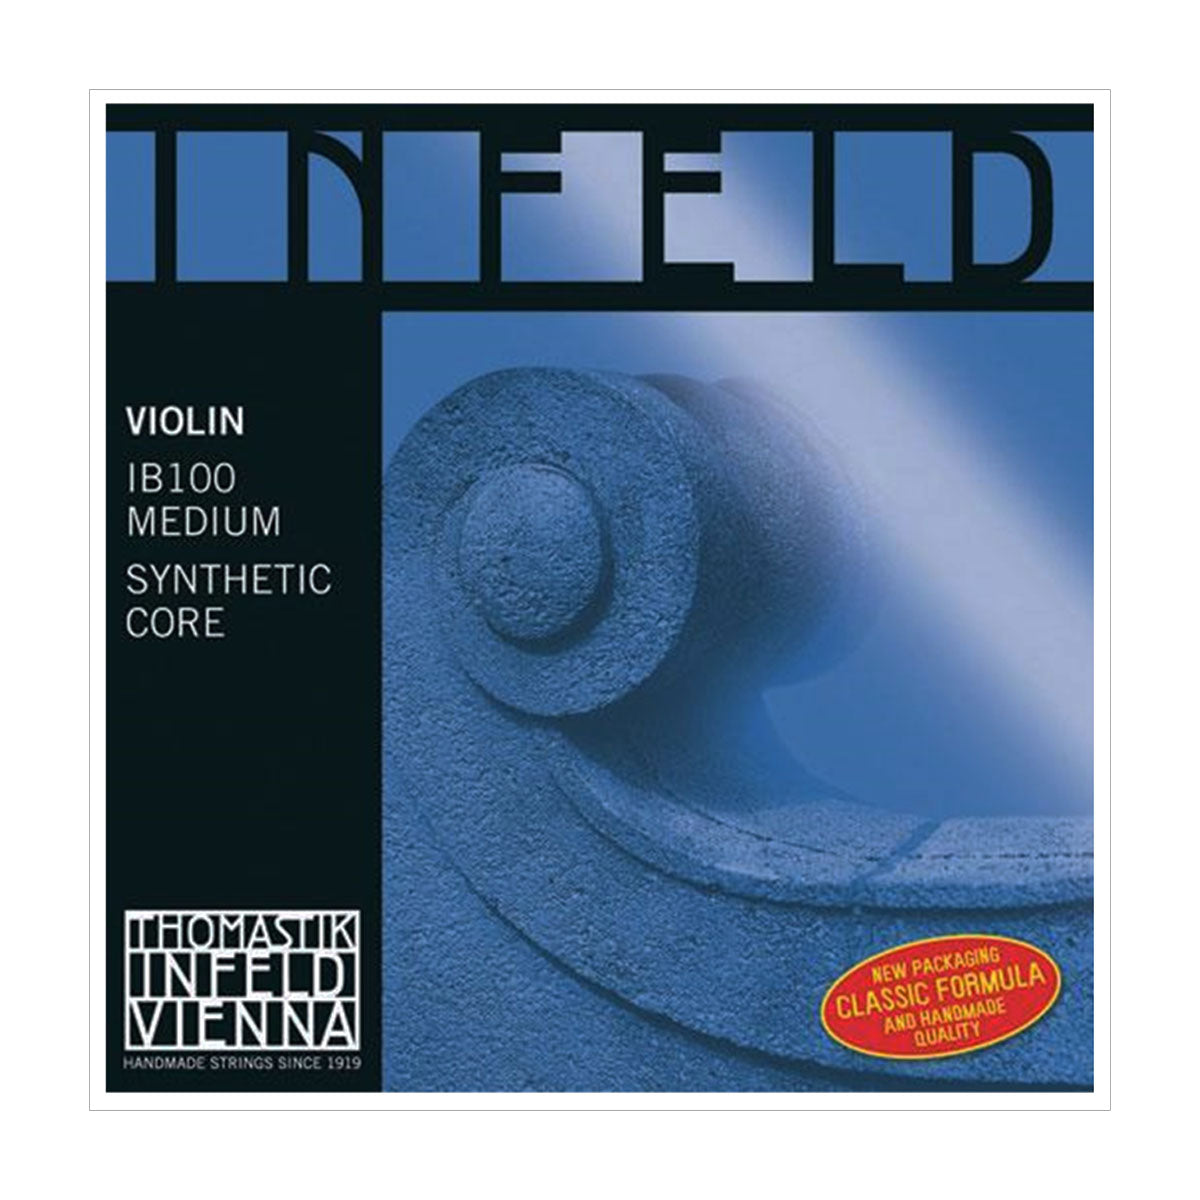 Infeld Blue Violin Strings, synthetic, composite, core Thomastik Infeld, Austria, full size, 4/4, 3/4, 1/2, 1/4, 1/8, 1/16, hand-picked and inspected by Violins and such, with TEO musical Instruments, London Ontario Canada